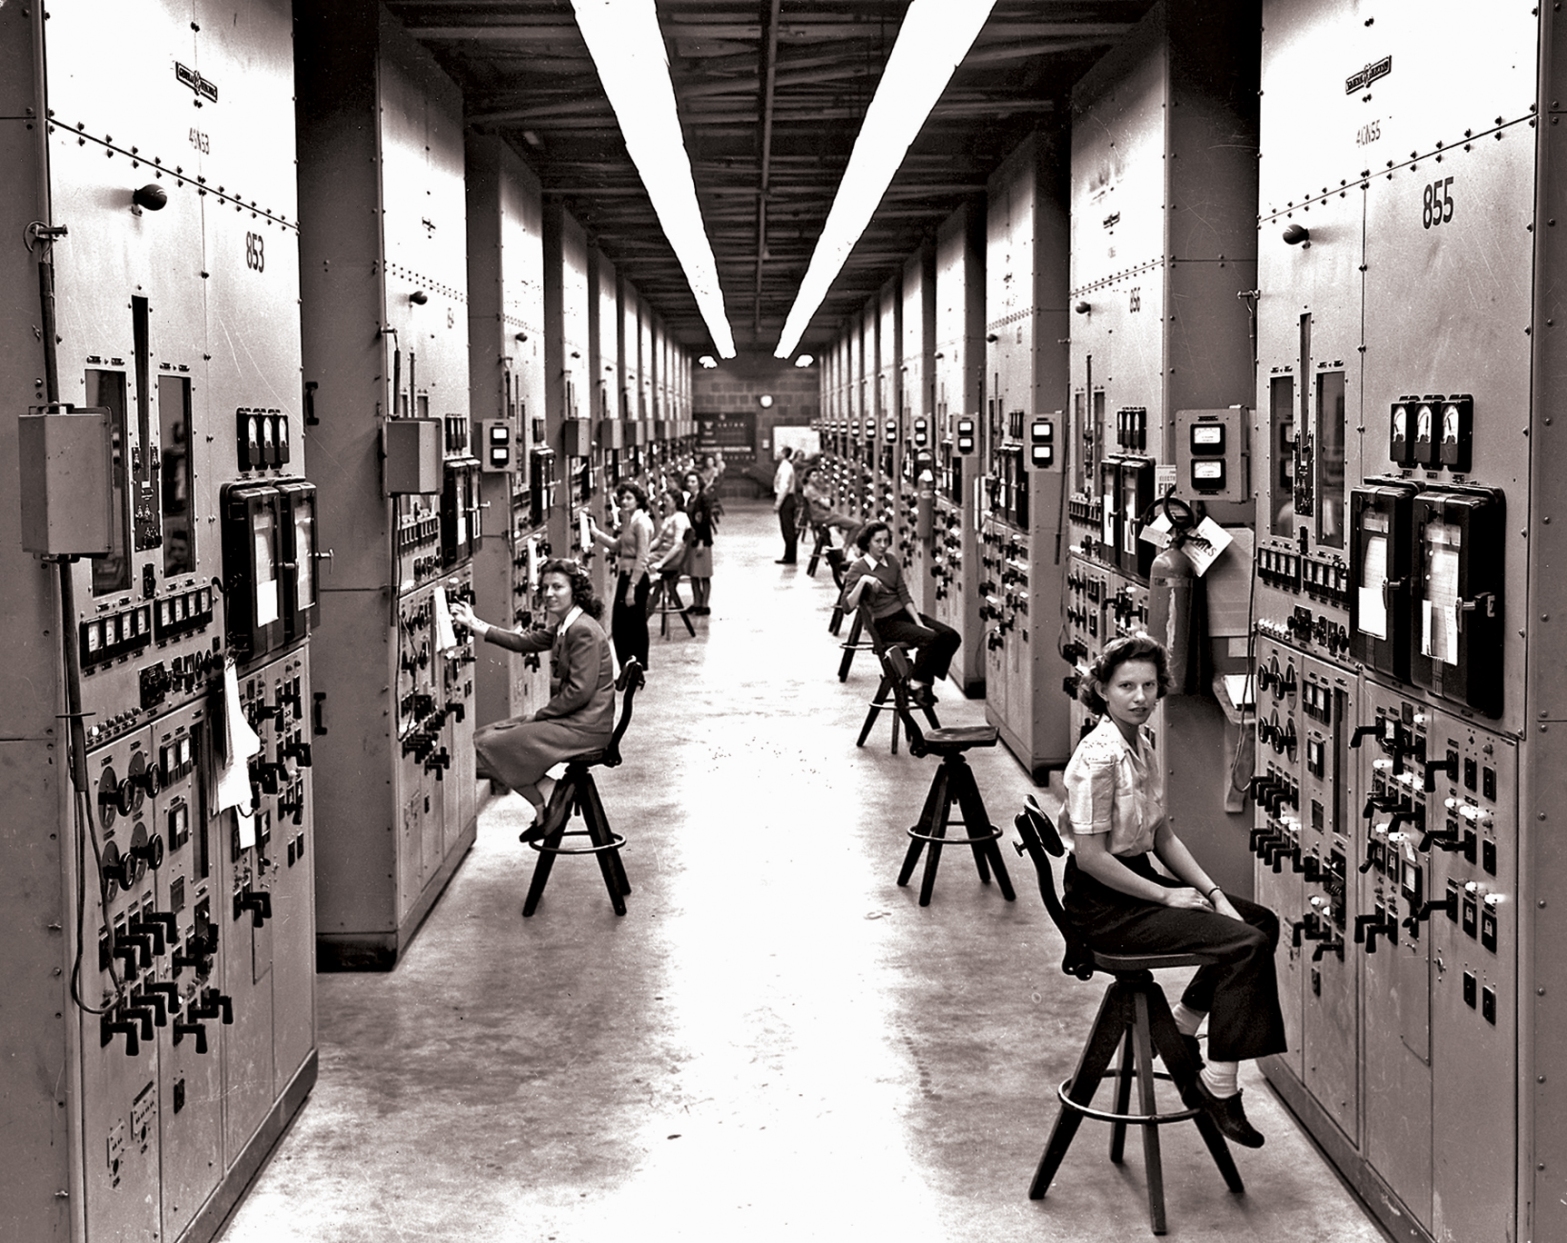 This photograph of the Calutron technicians is one of the most famous photographs from Oak Ridge and Gladys Owens is the technician closest to the camera.